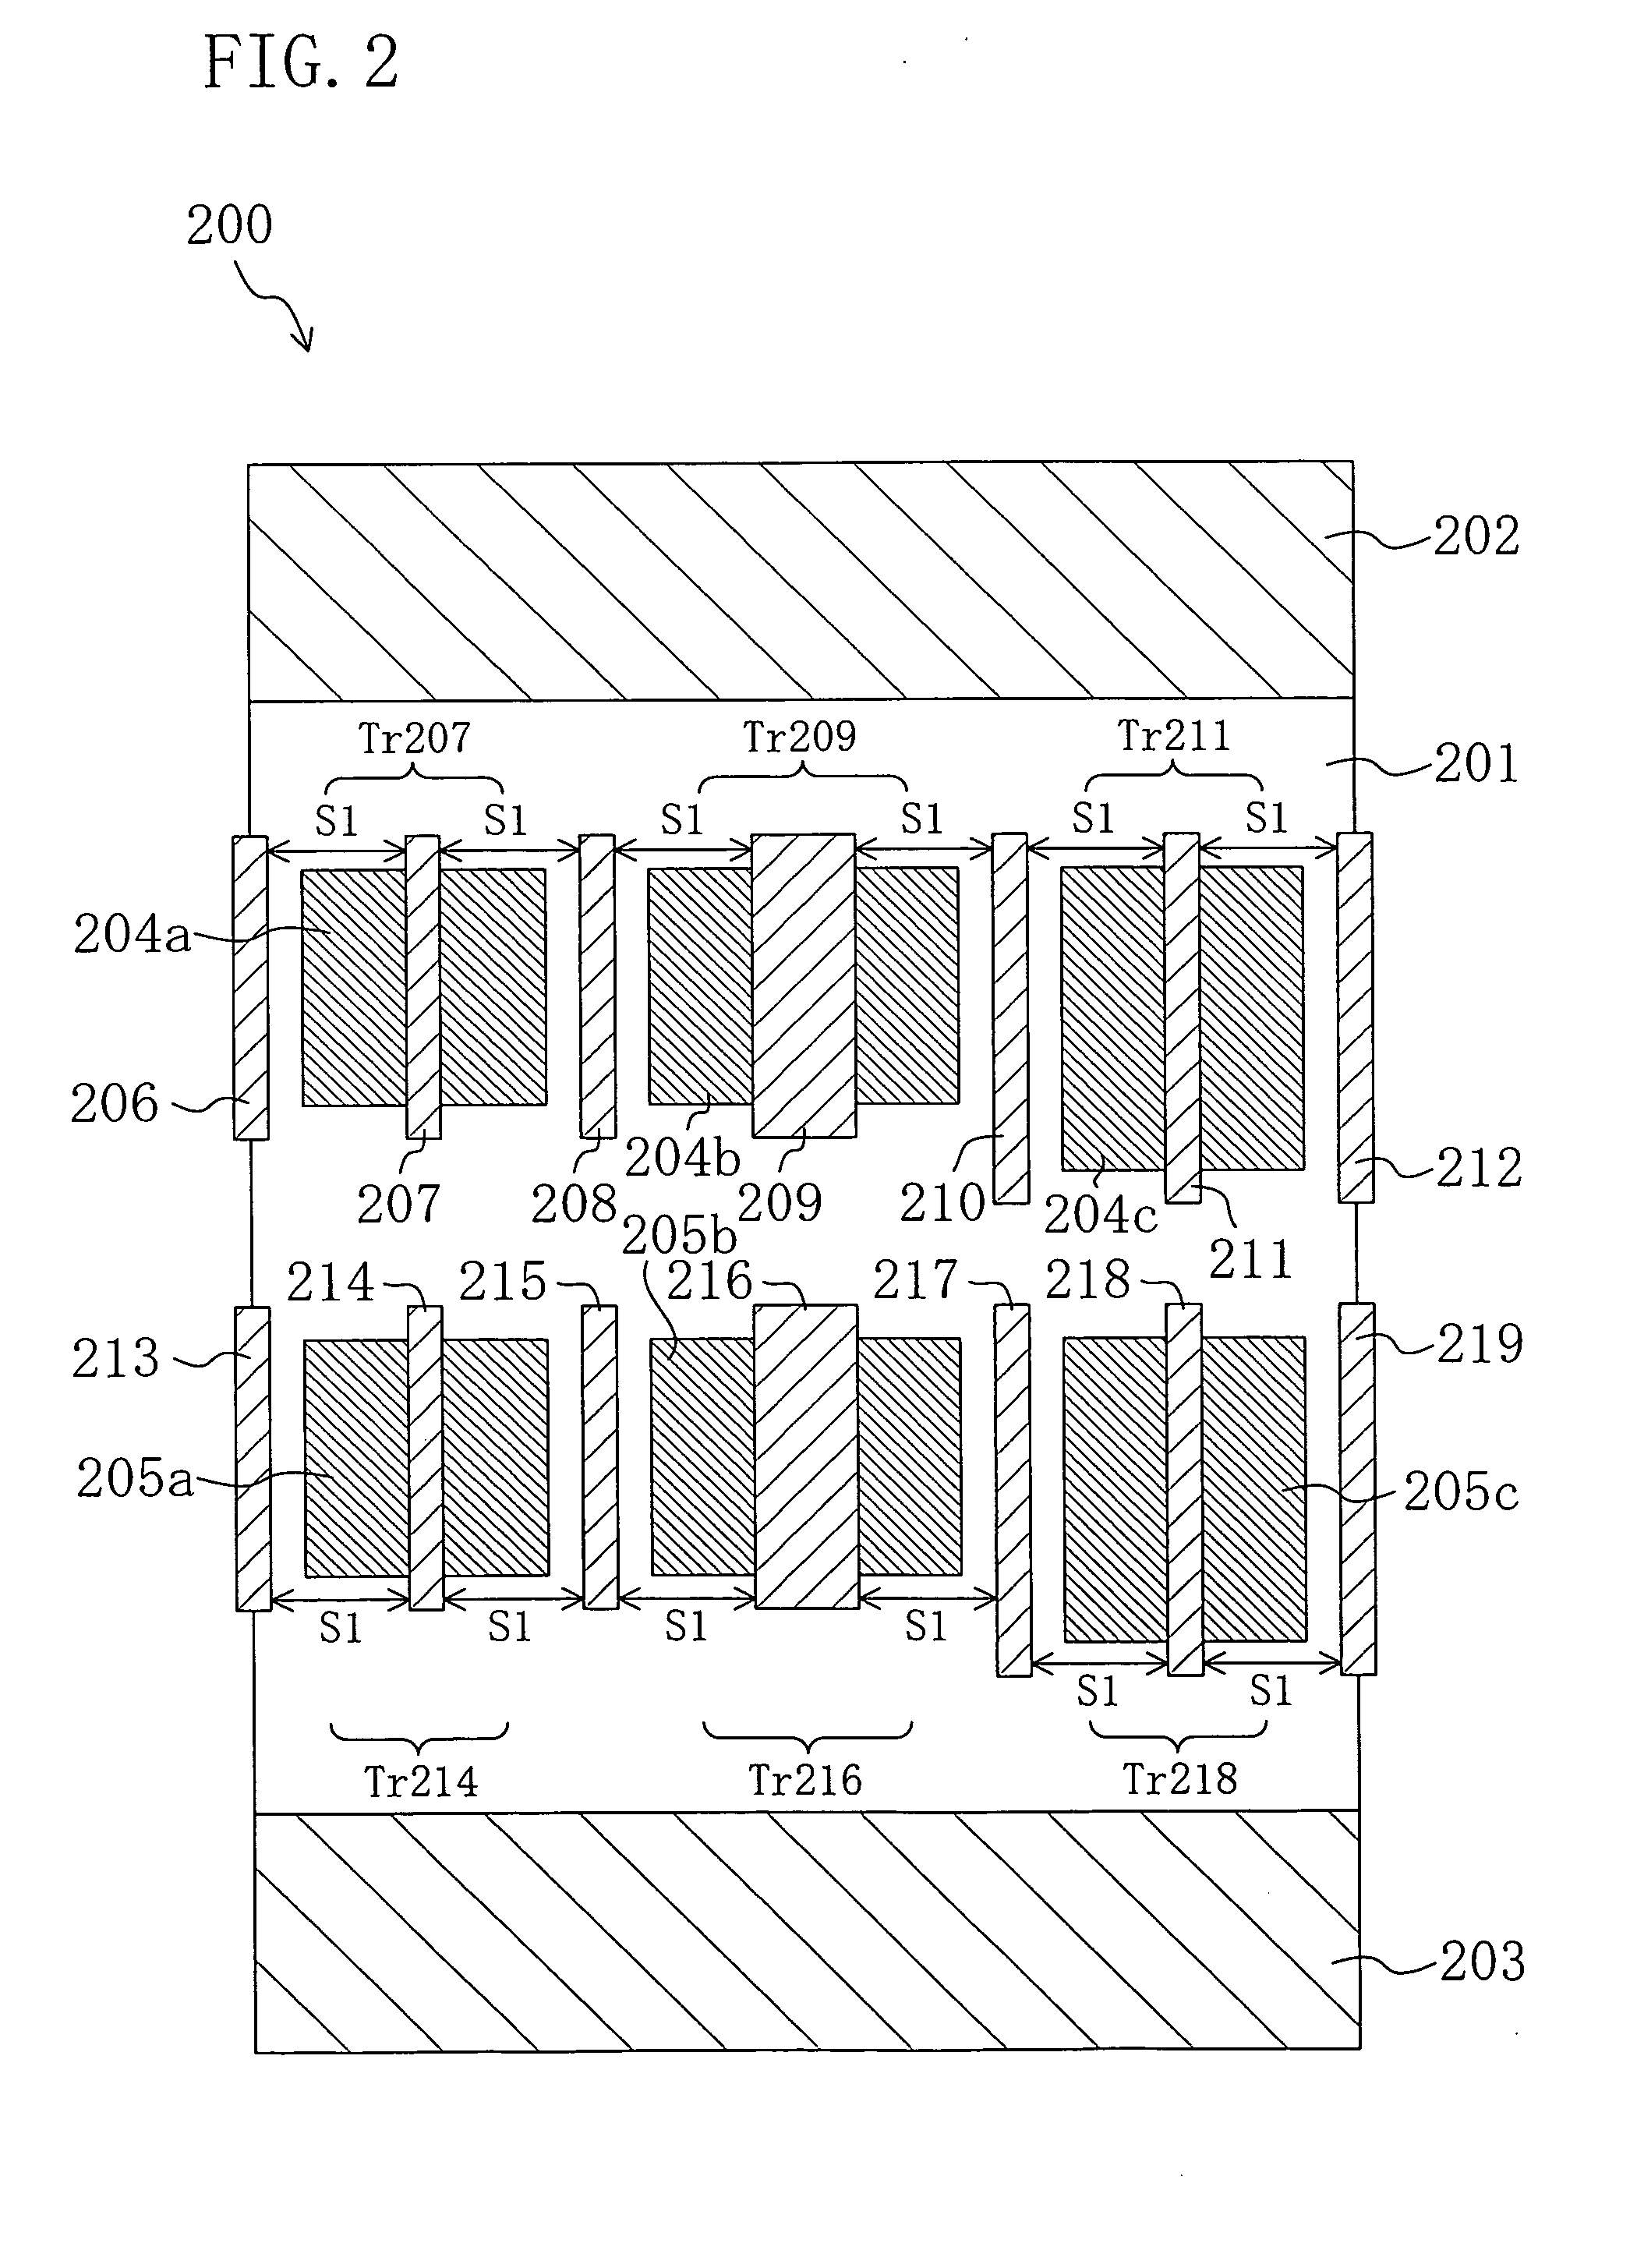 Standard cell, standard cell library, and semiconductor integrated circuit